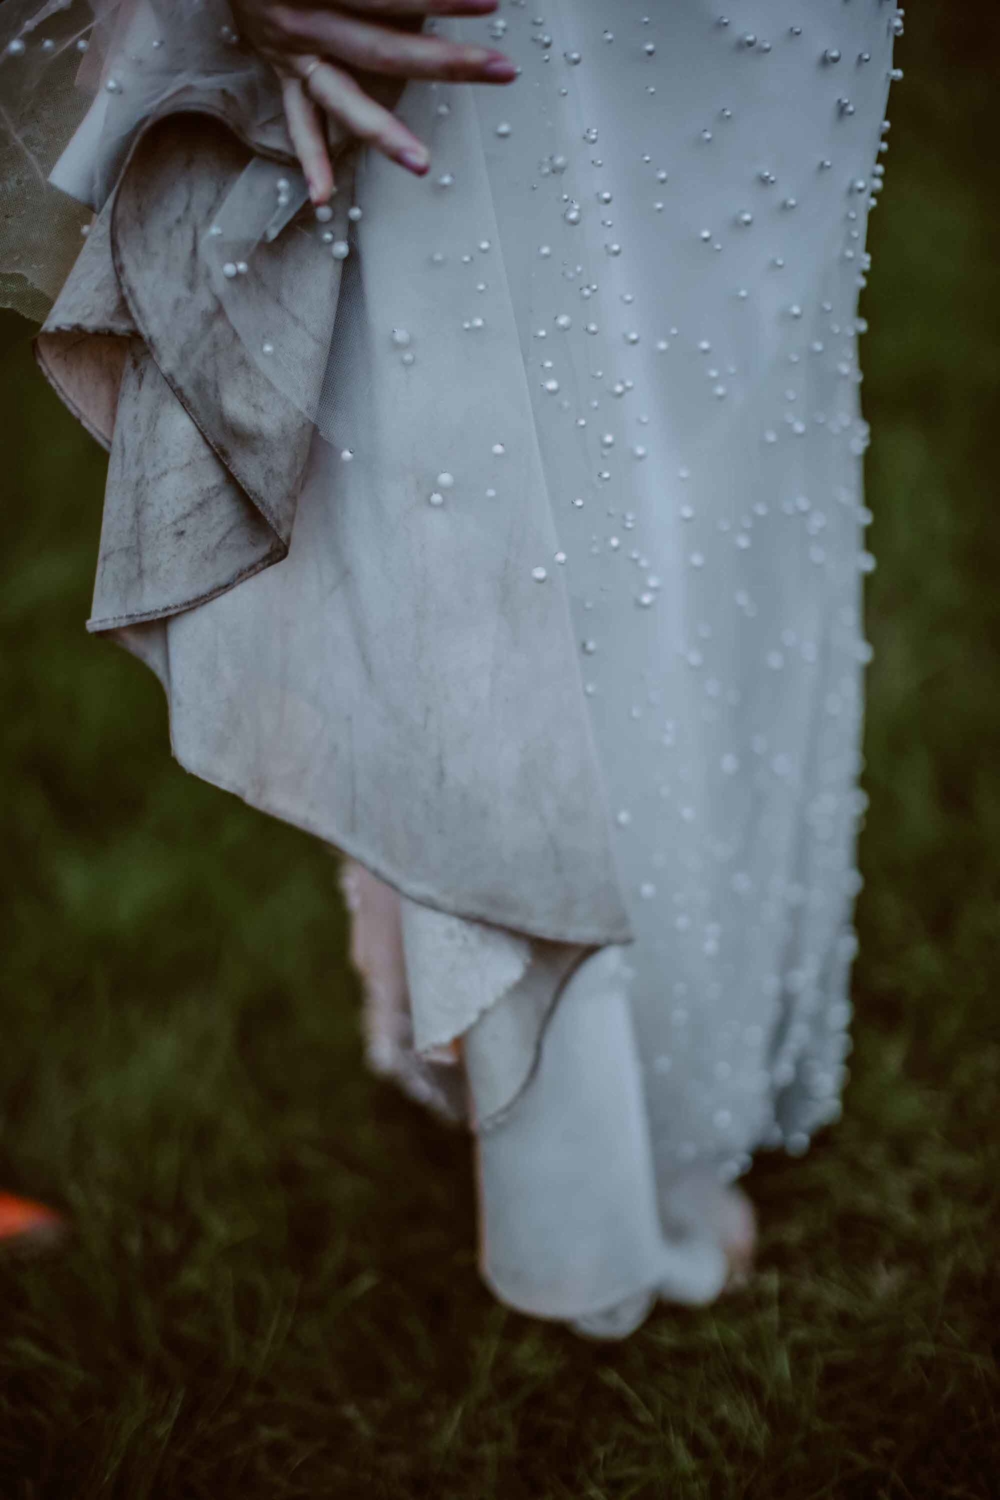 A close-up photo of the bride's dress, showing signs of wear from walking and enjoying the great outdoors during her wedding day photo shoot.